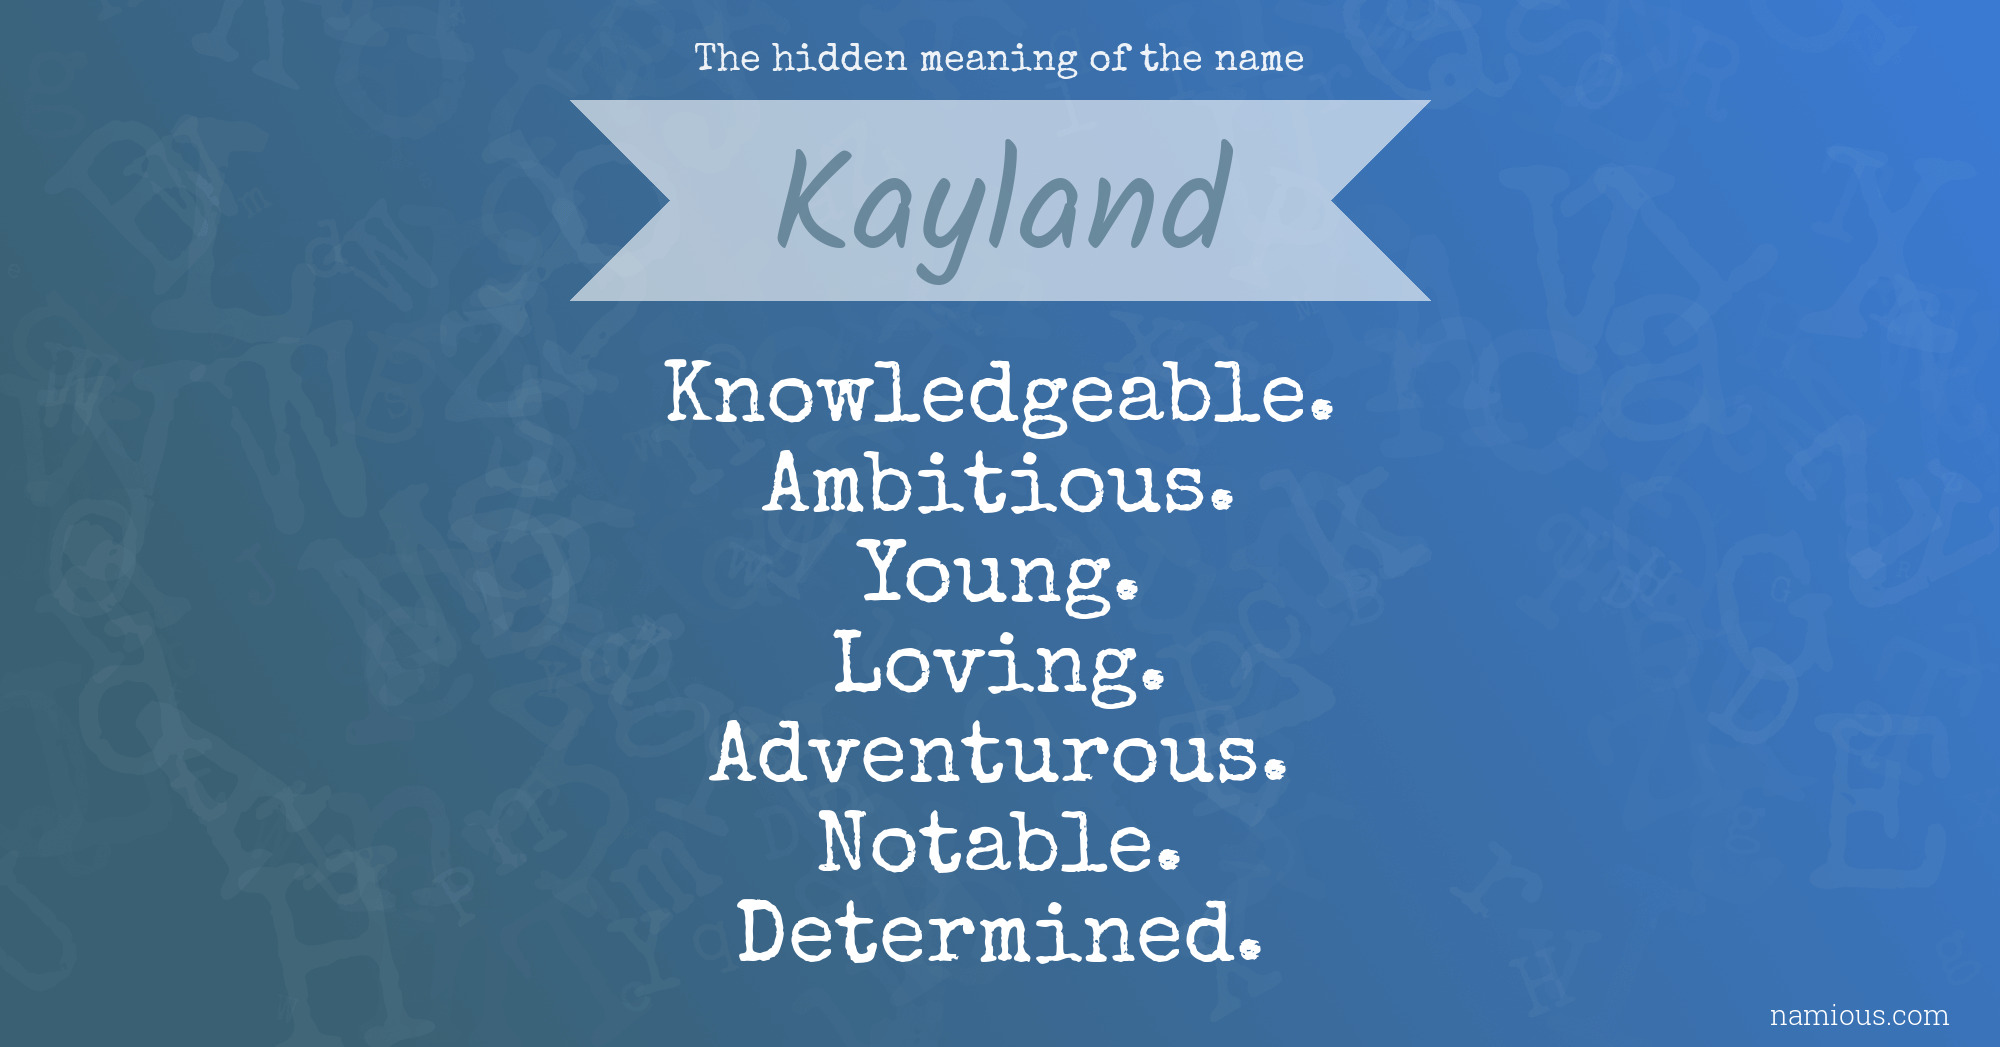 The hidden meaning of the name Kayland